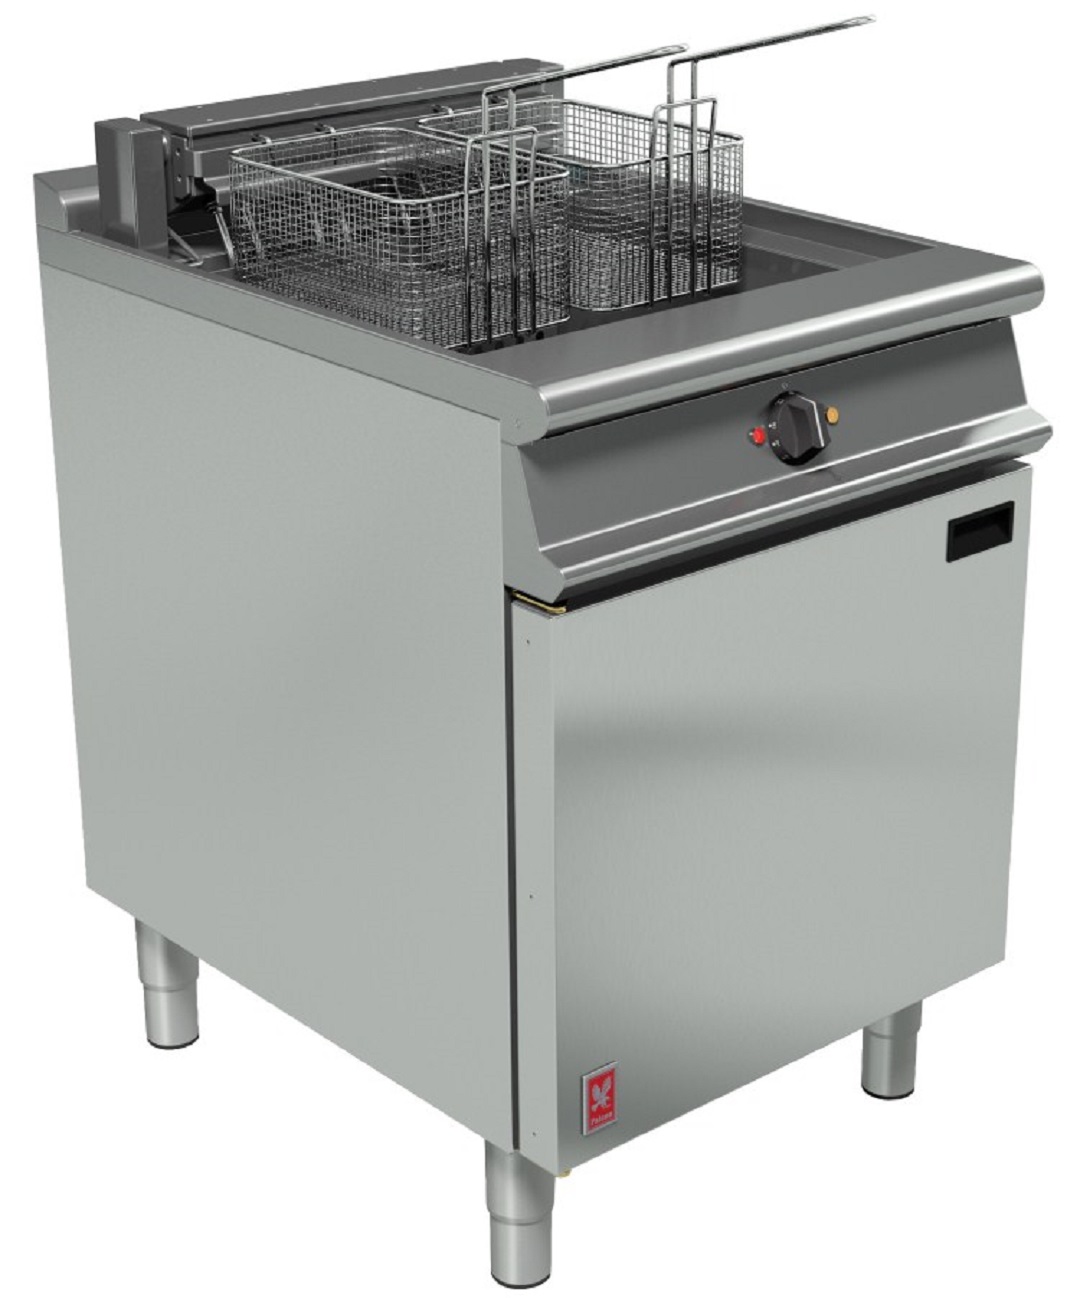 Falcon Dominator PLUS E3860F Twin Basket Fryer With In-Built Filtration